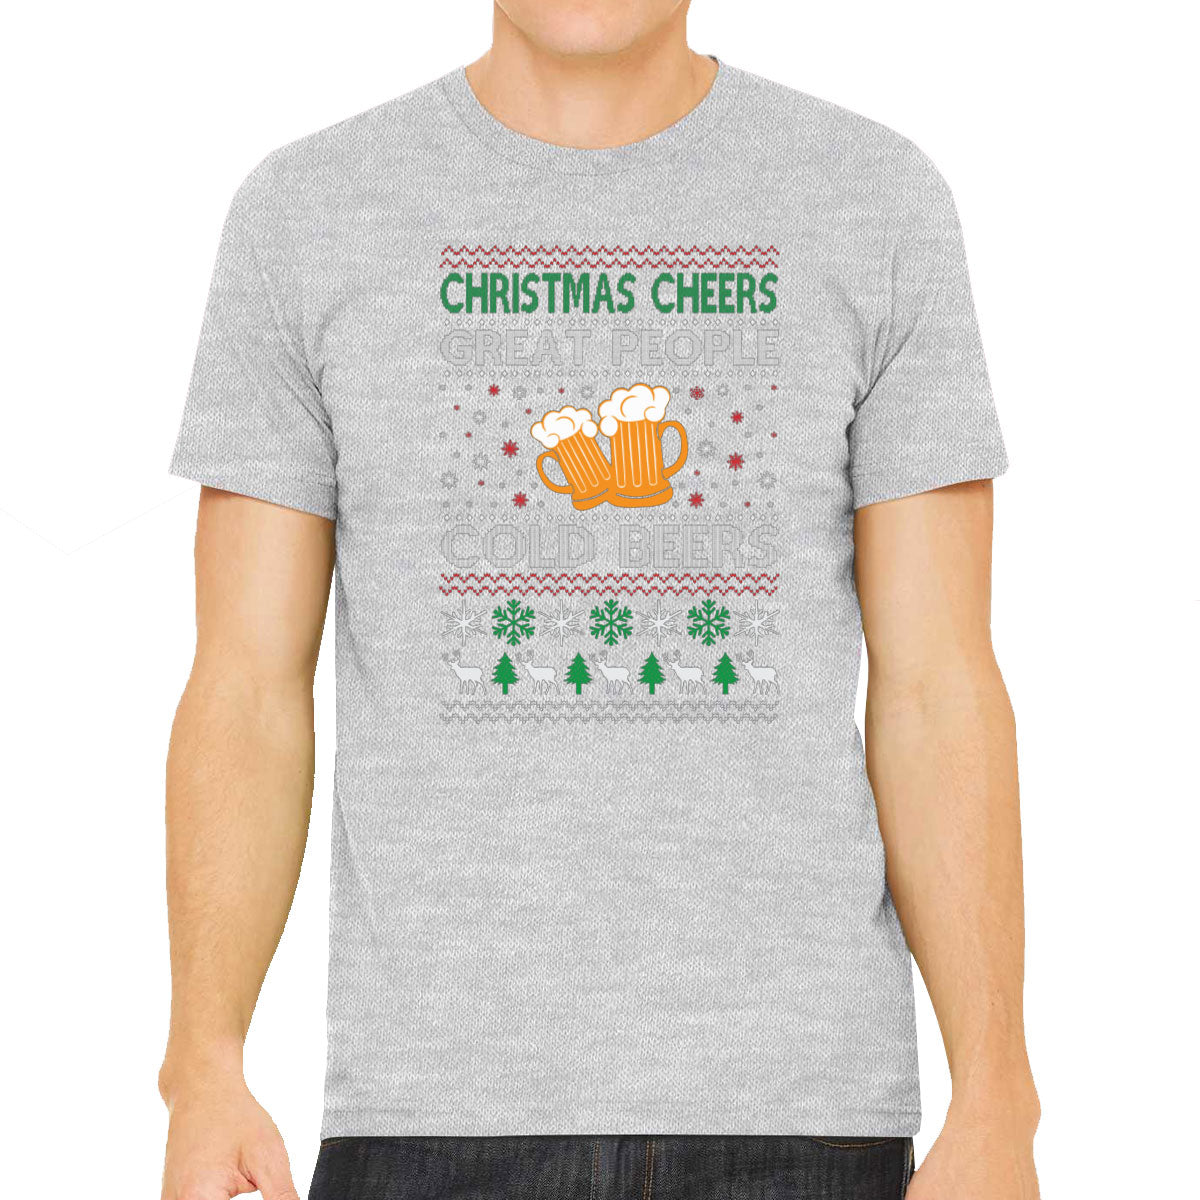 Christmas Cheers Great People Cold Beers Men's T-shirt